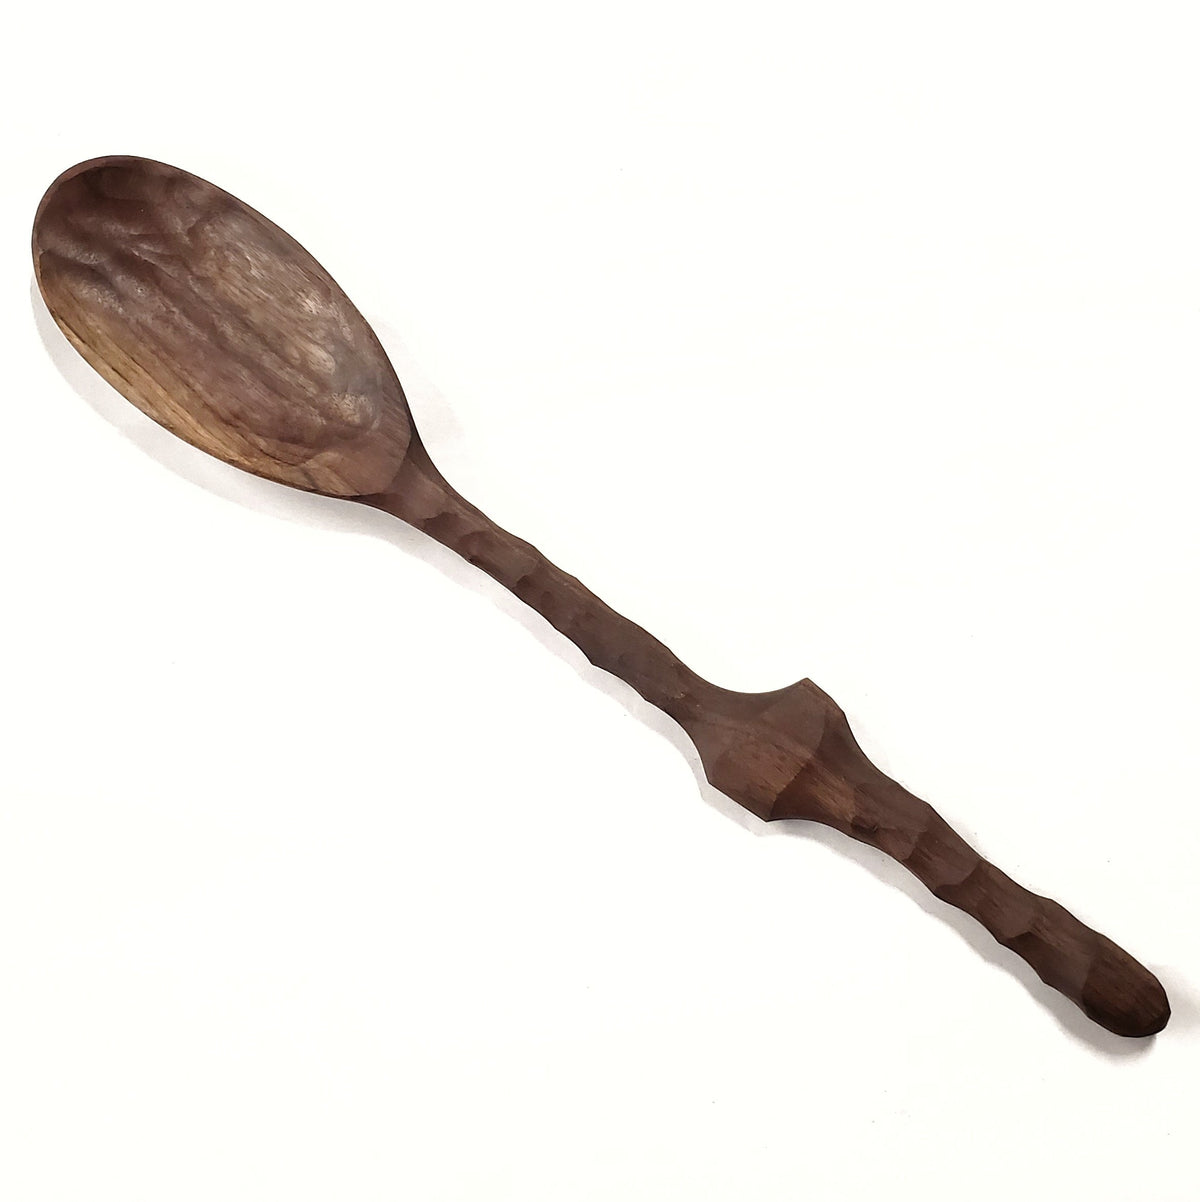 Spud Spoon, Catering / Canning / Serving Spoon for large family